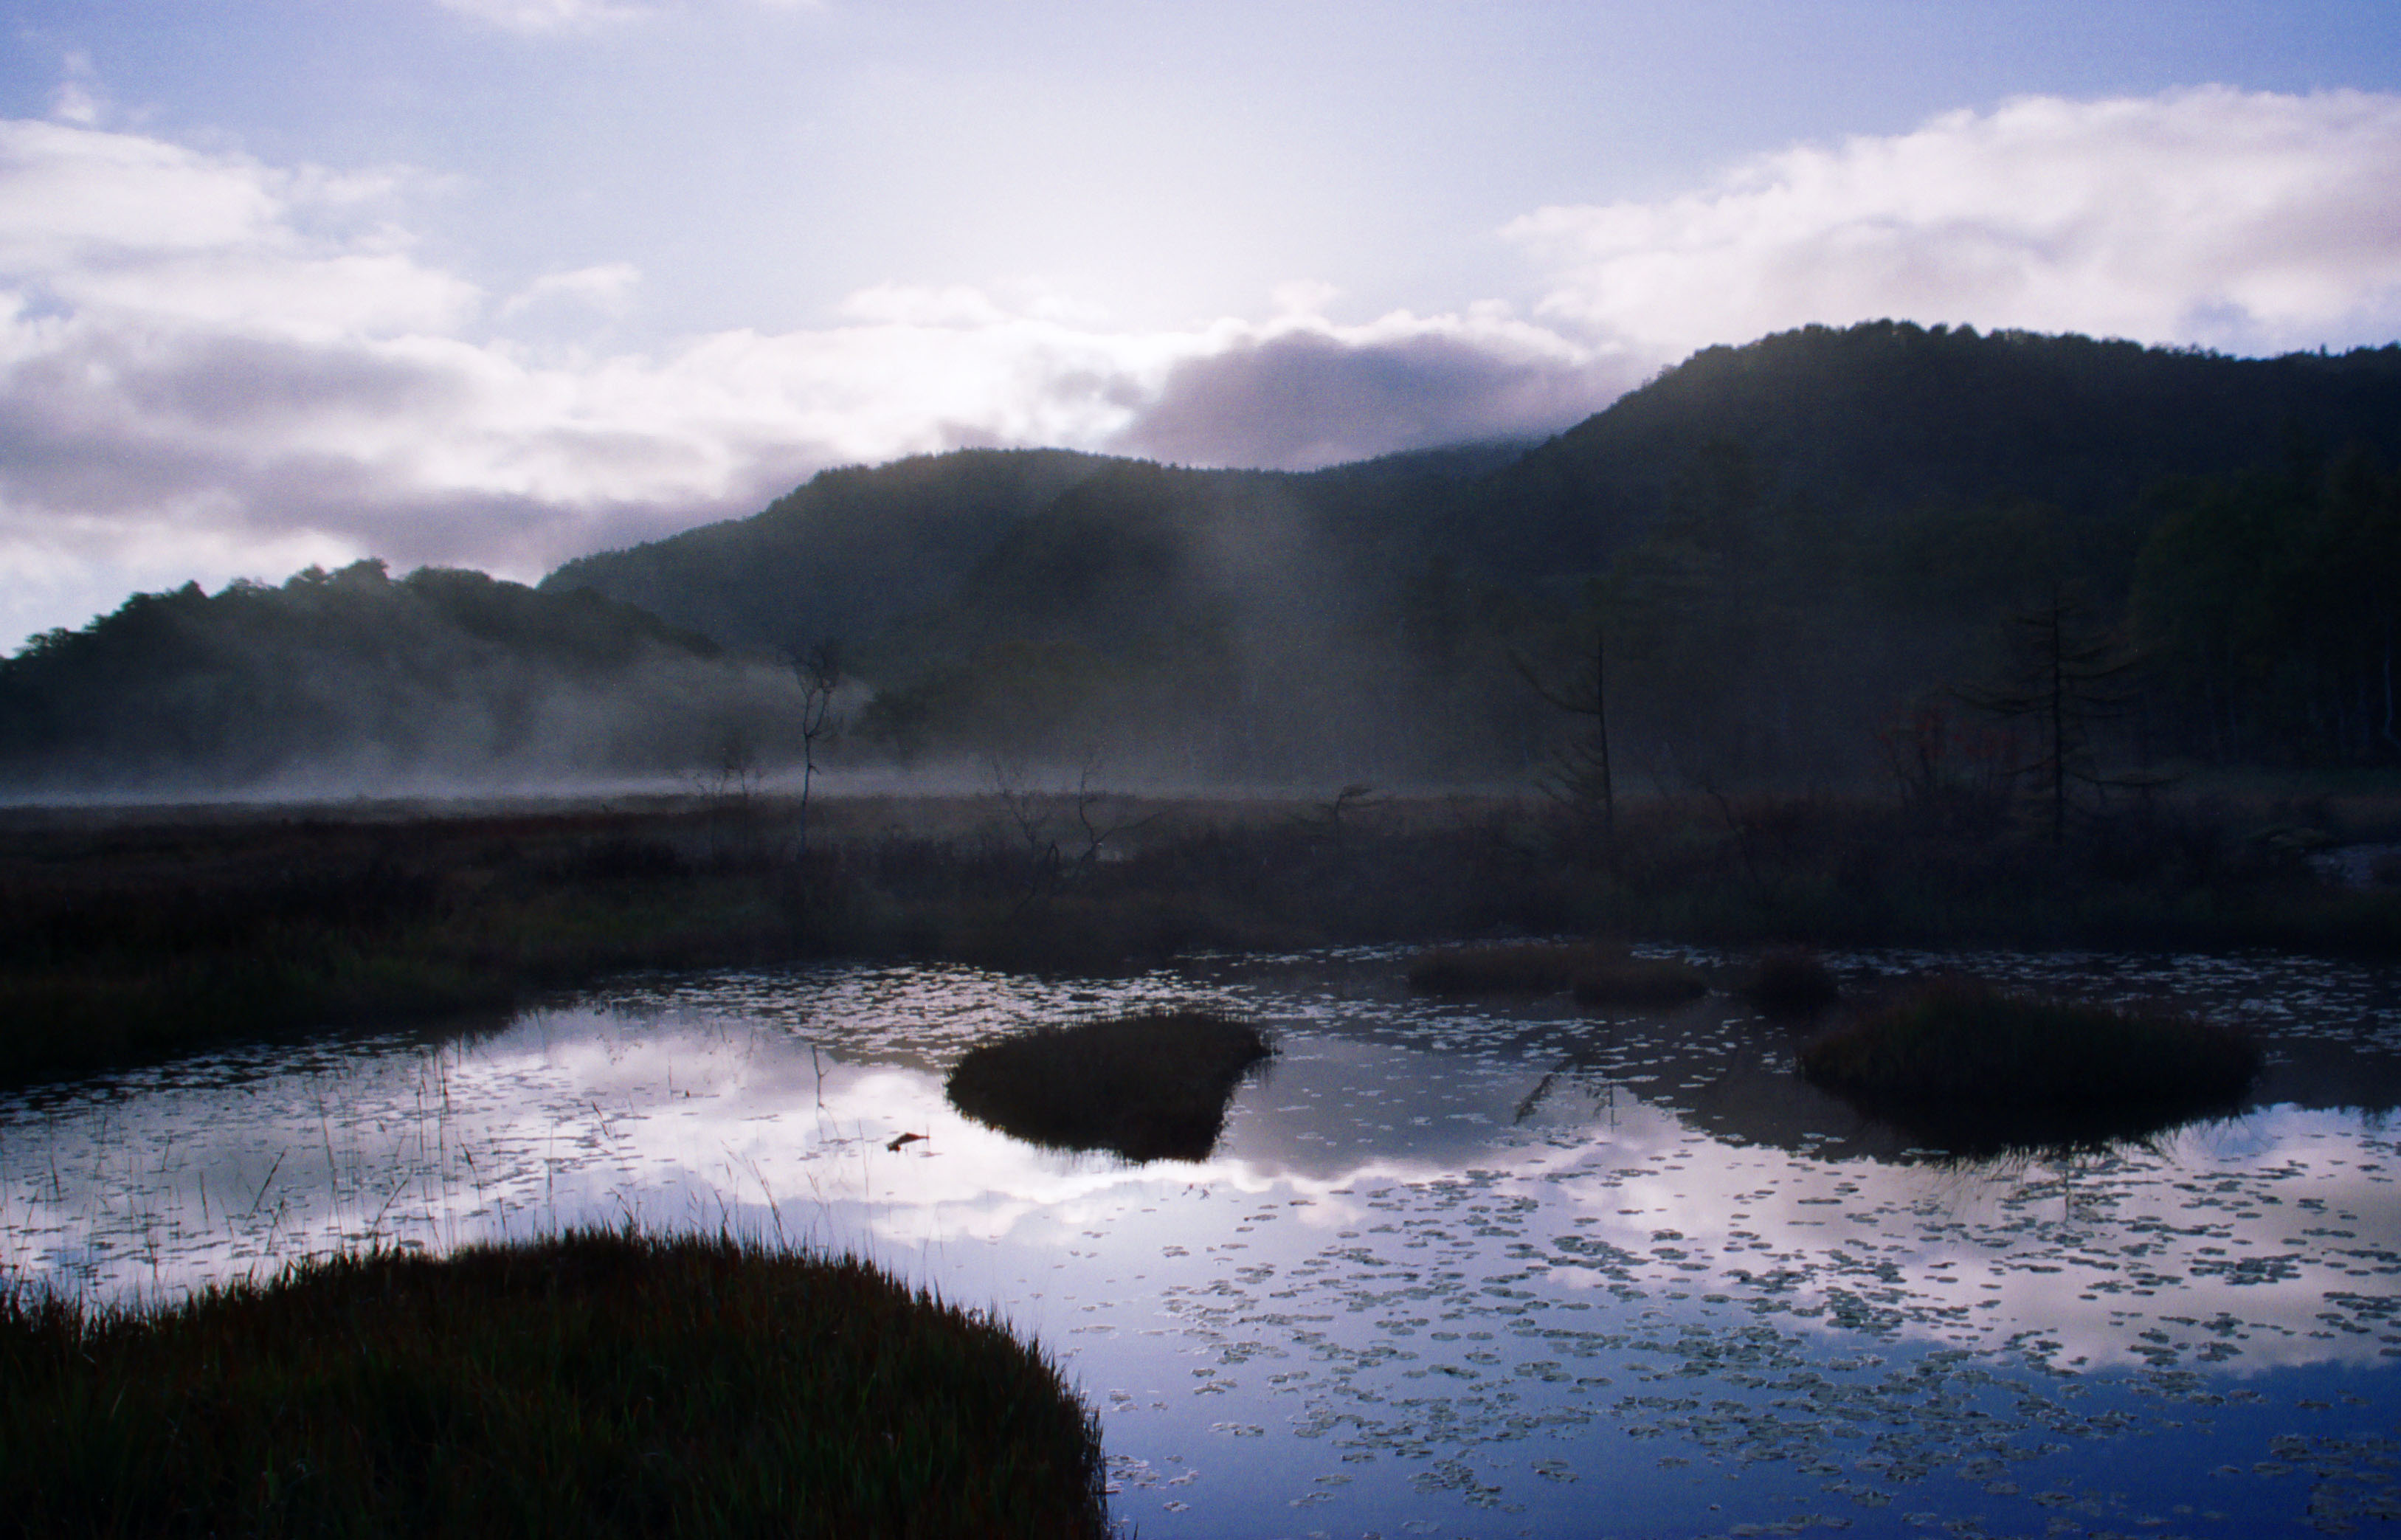 photo,material,free,landscape,picture,stock photo,Creative Commons,Wake-up time indigo, pond, tree, mountain, fog